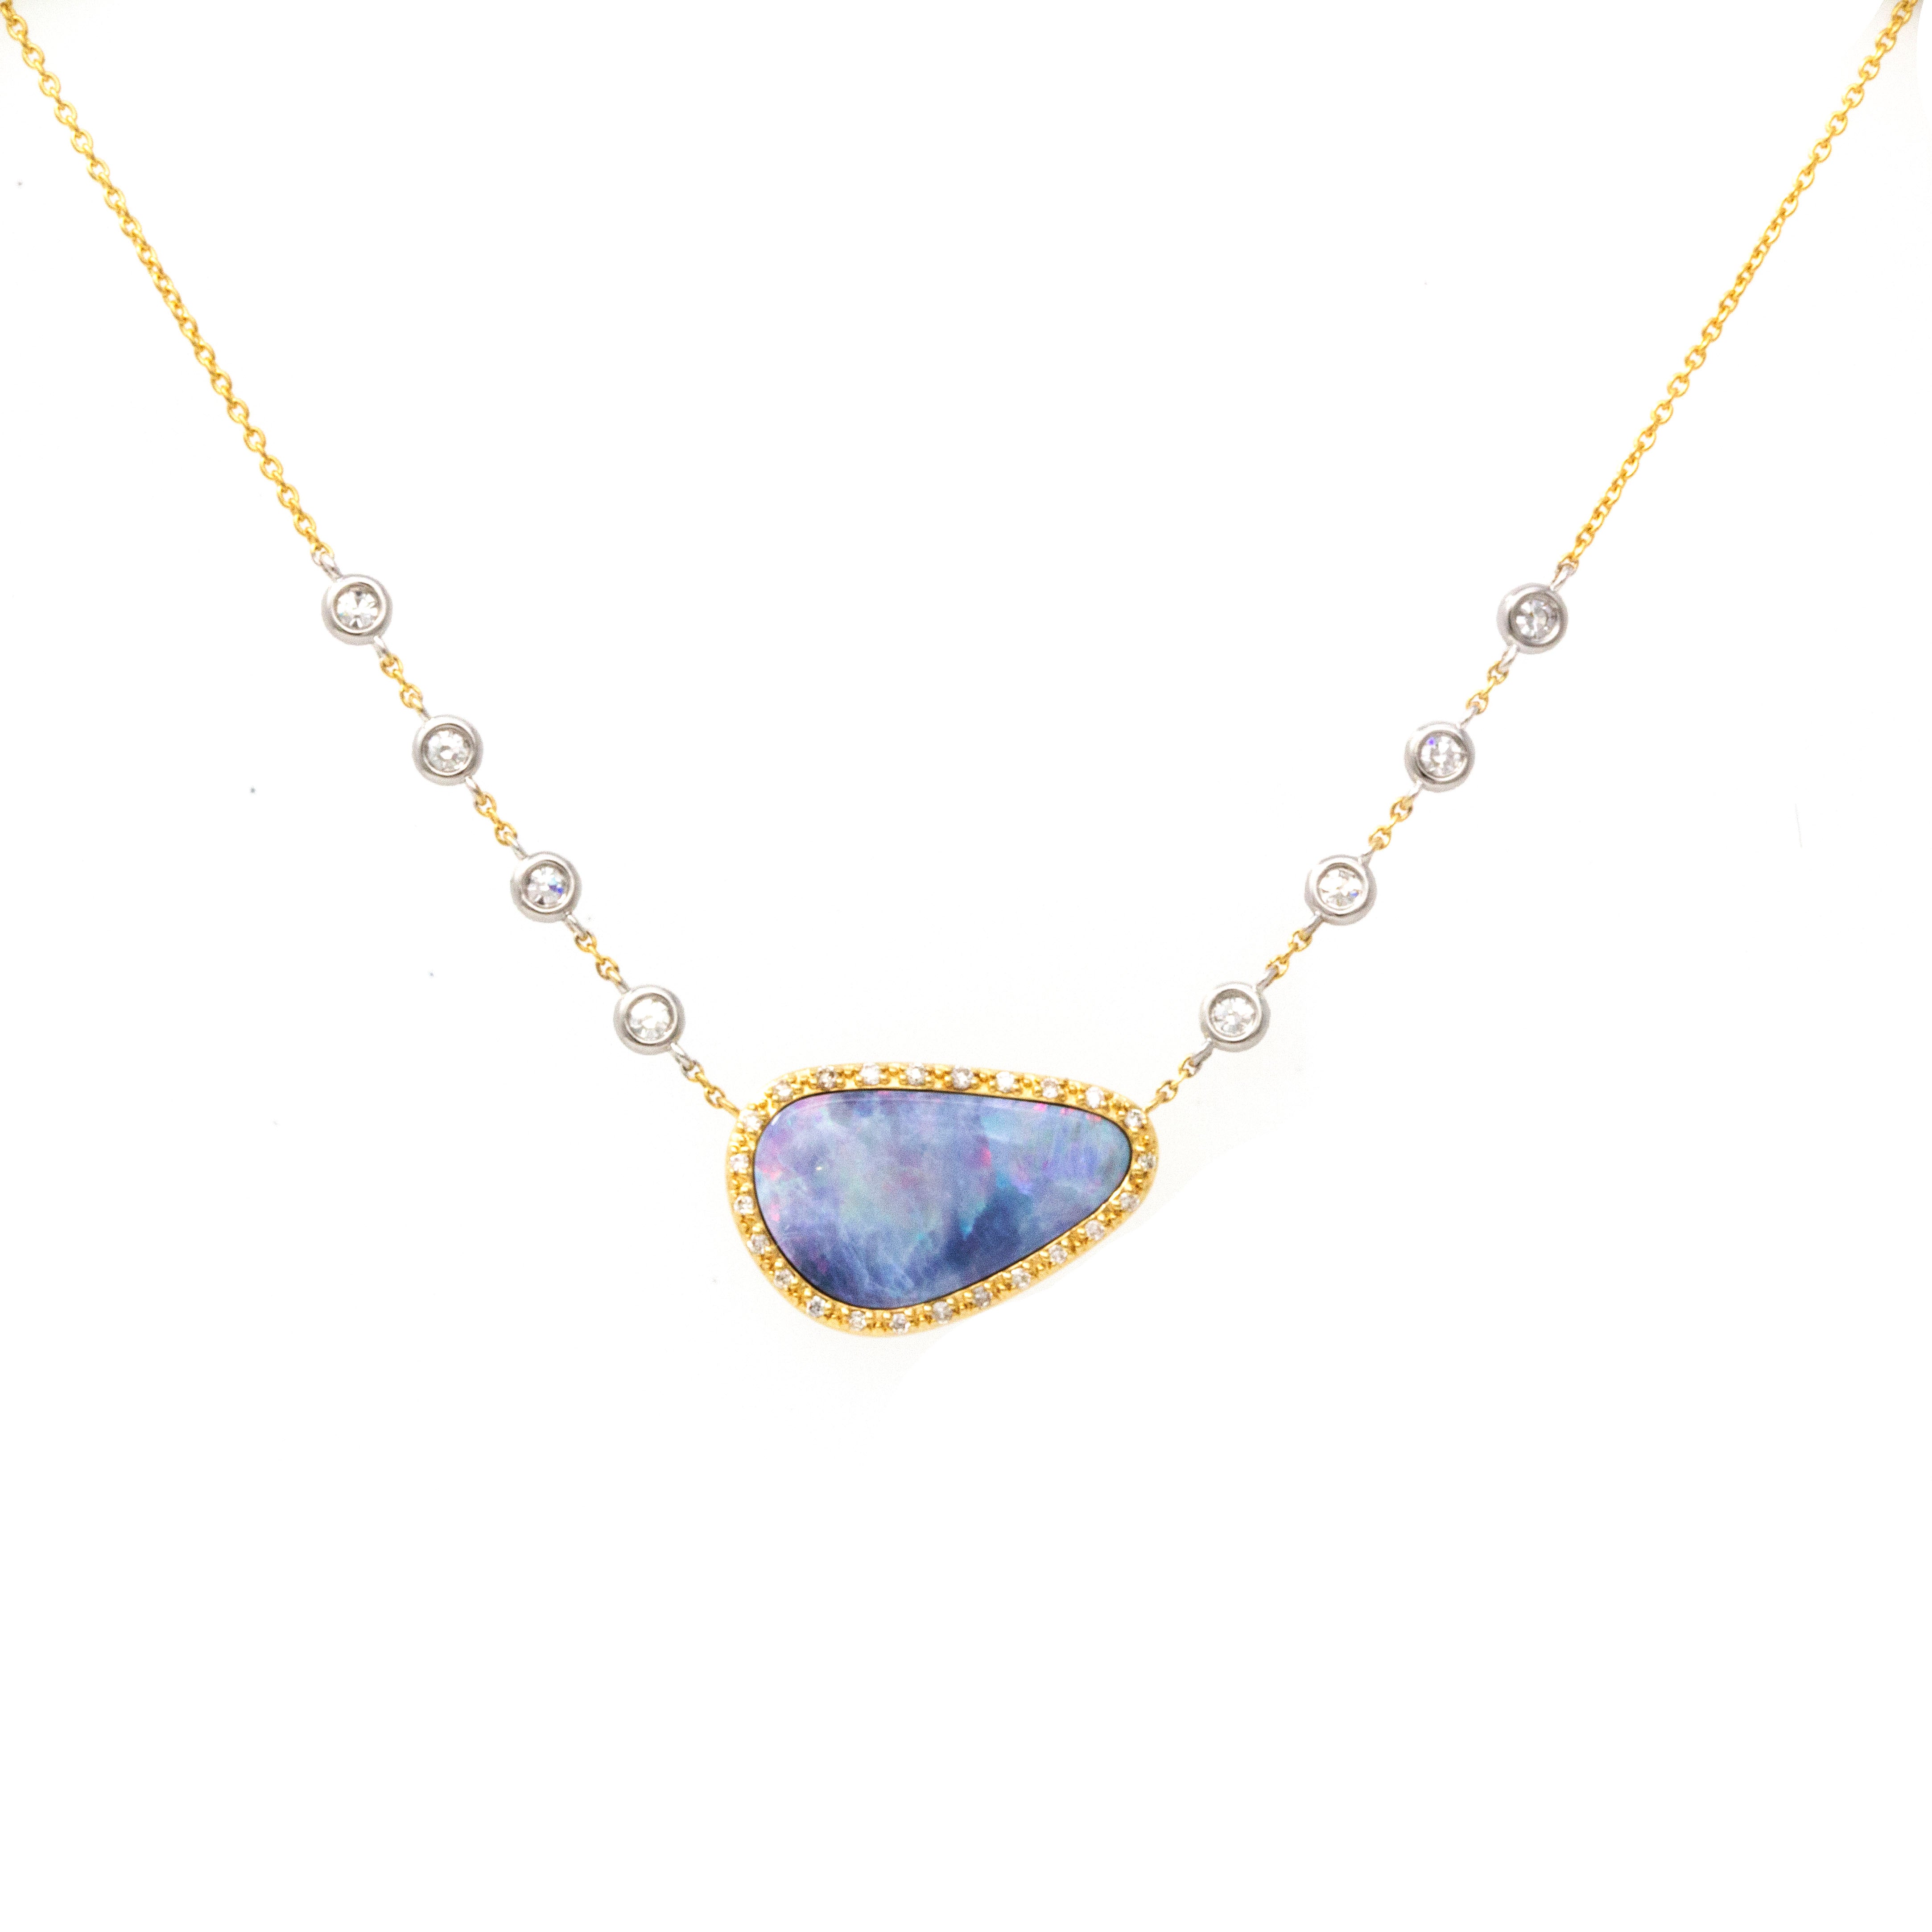 Ethereal Iridescence: Opal & Diamonds Two-Tone Necklace